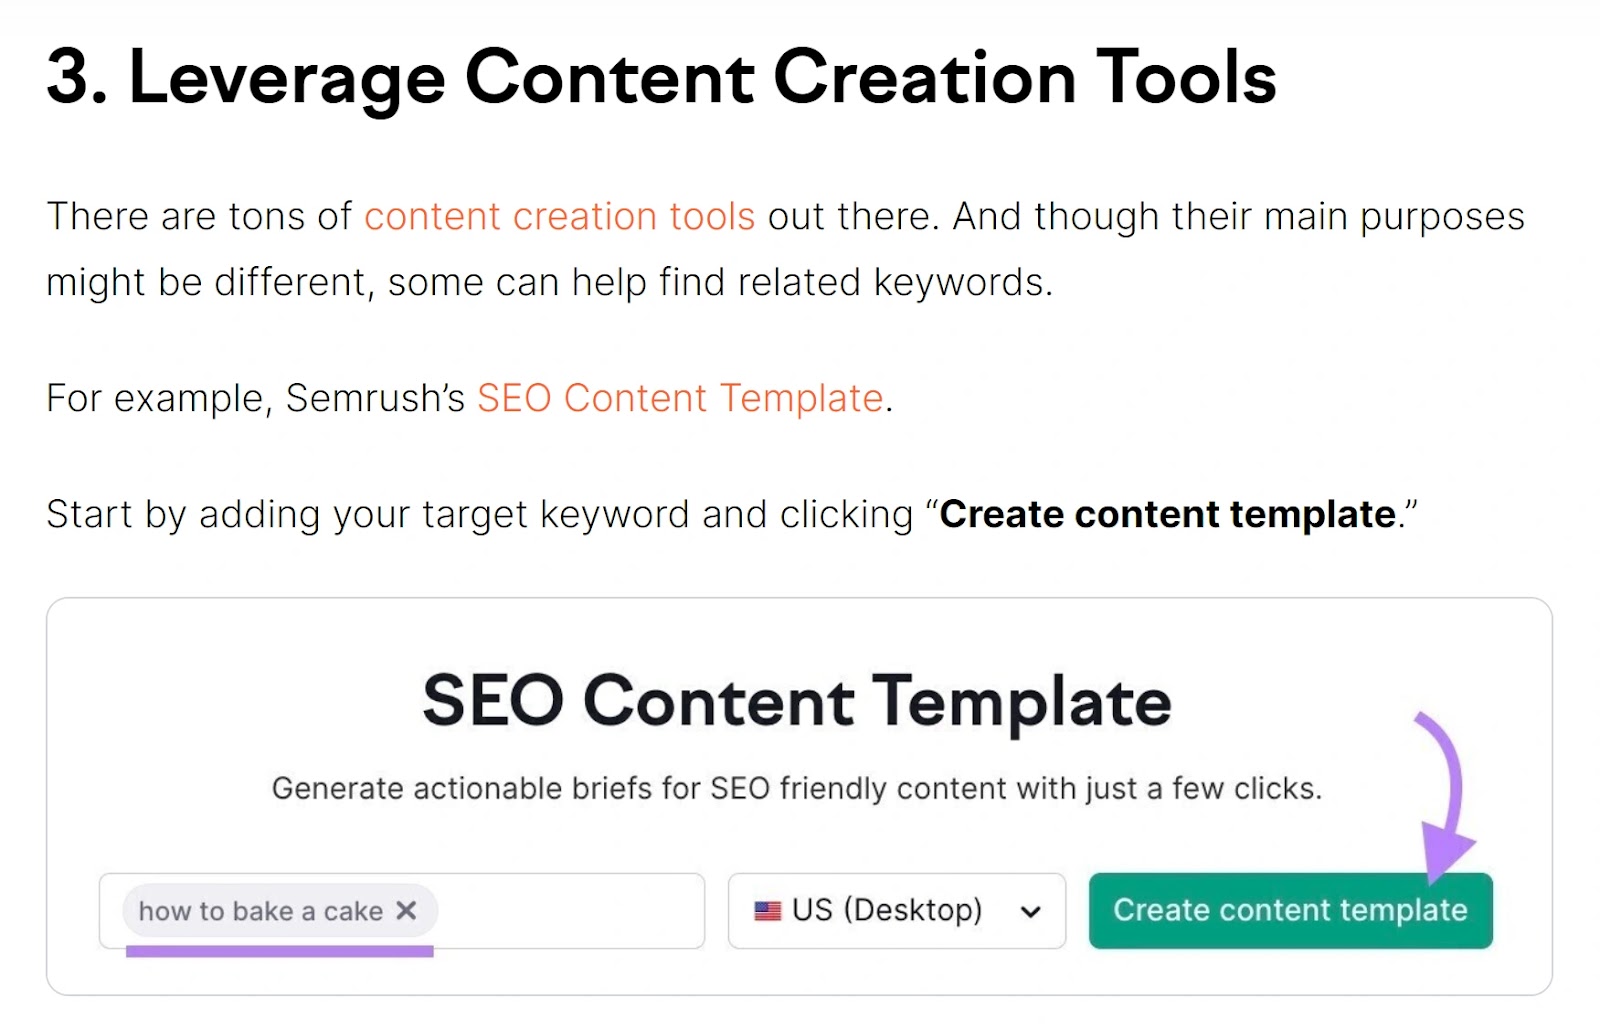 "3. Leverage content creation tools" section of the article